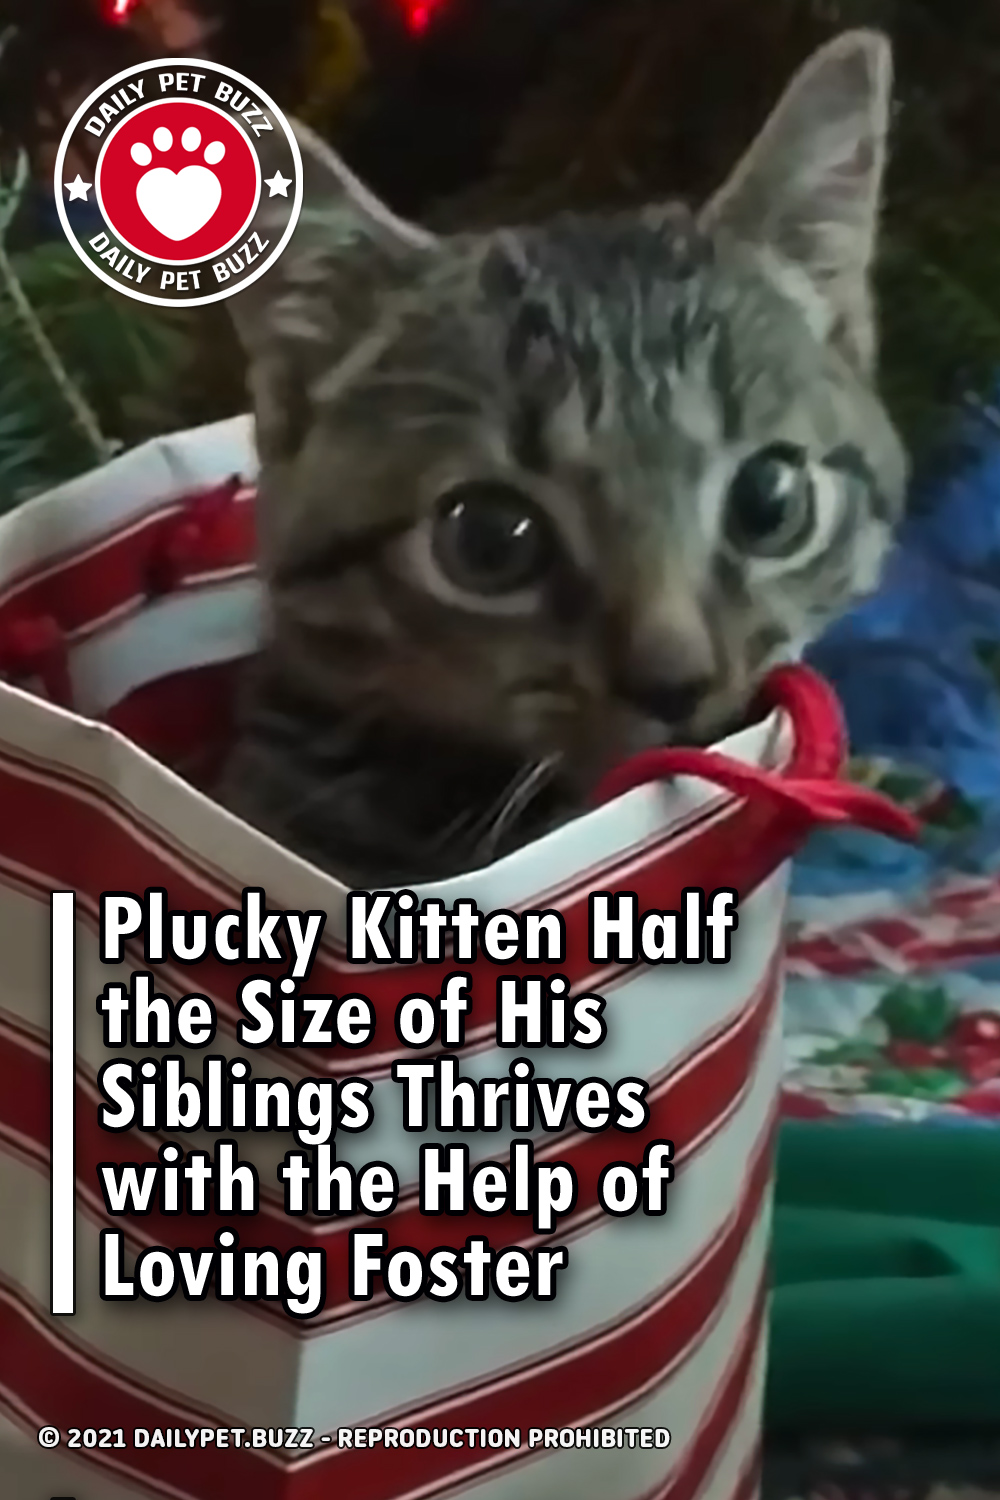 Plucky Kitten Half the Size of His Siblings Thrives with the Help of Loving Foster